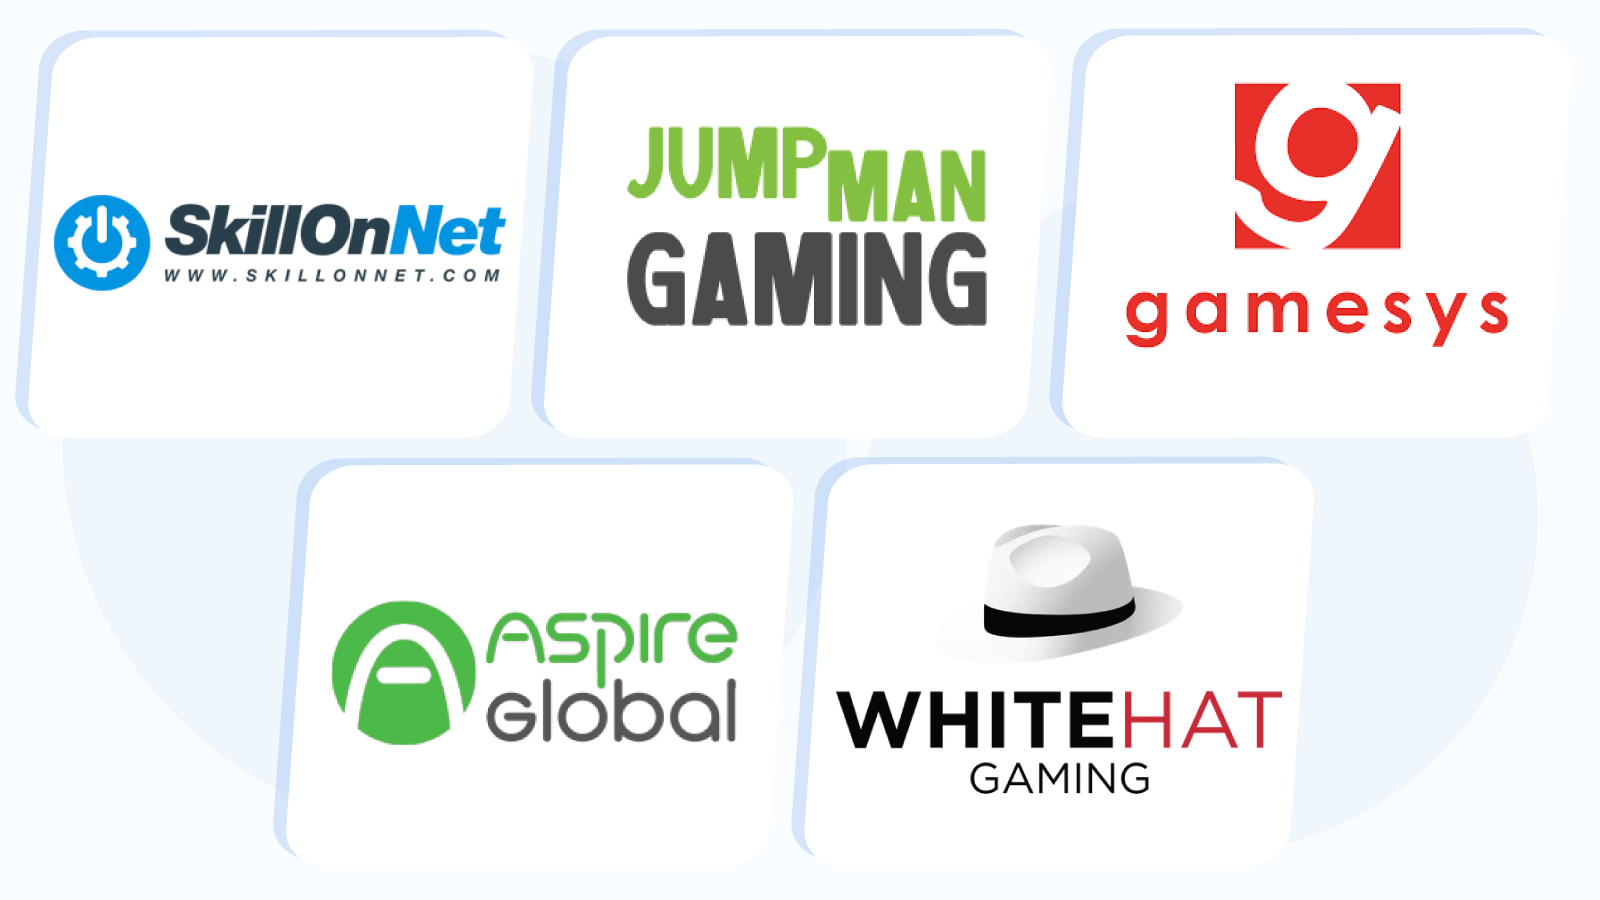 Top Alternatives from Other UK Casino Networks